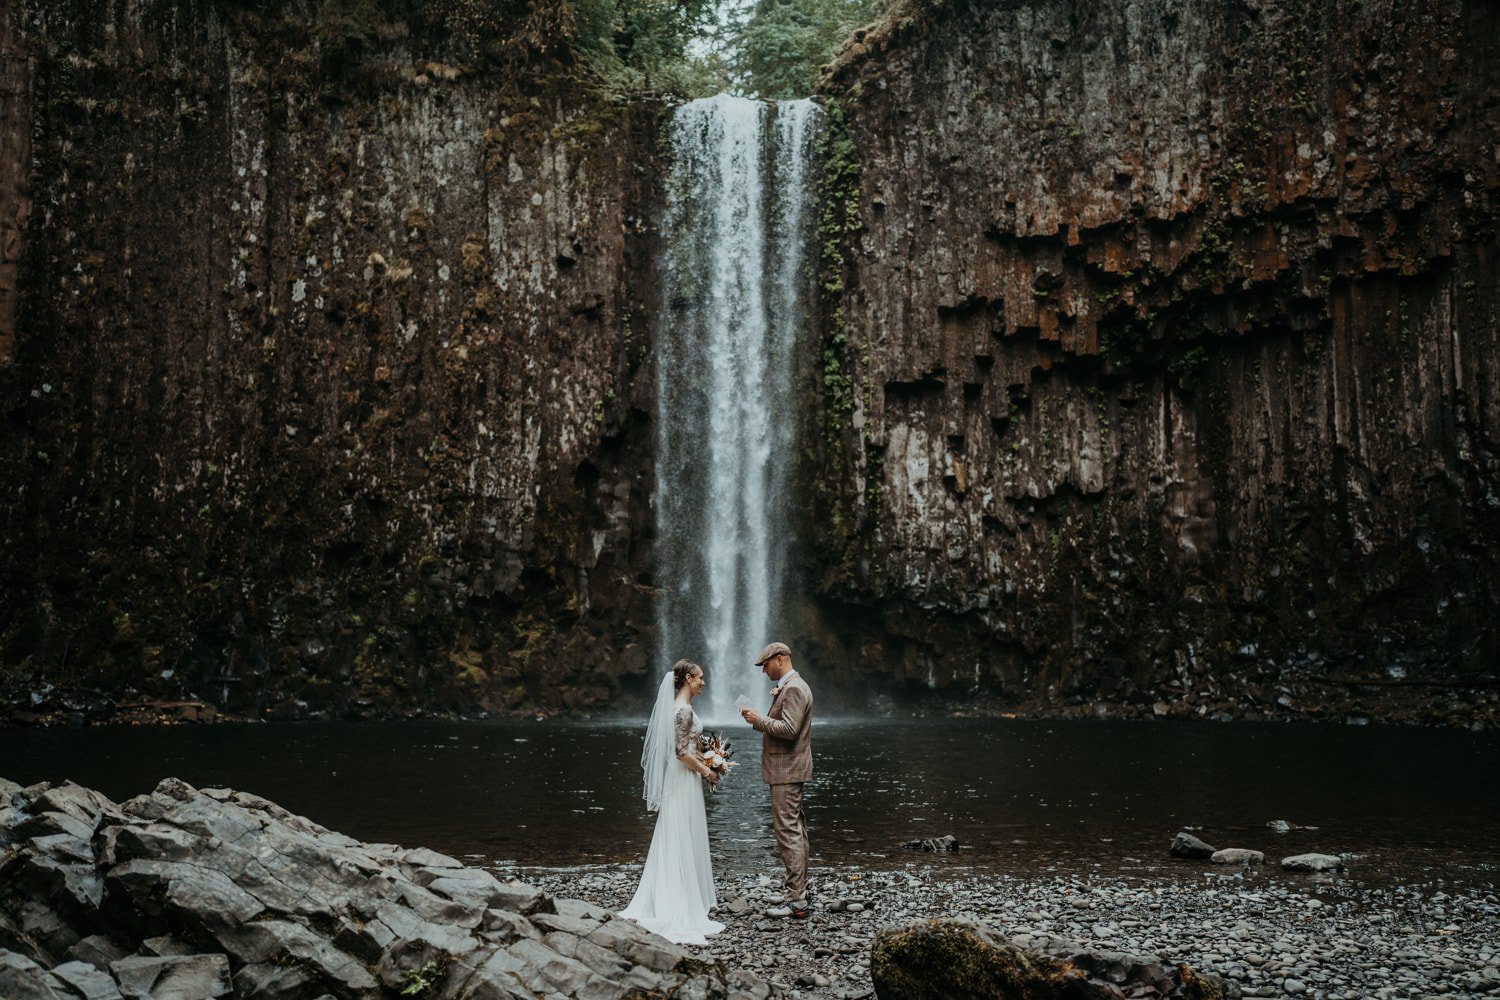 A bride and groom stand in front of Abiqua Falls and exchange wedding vows.